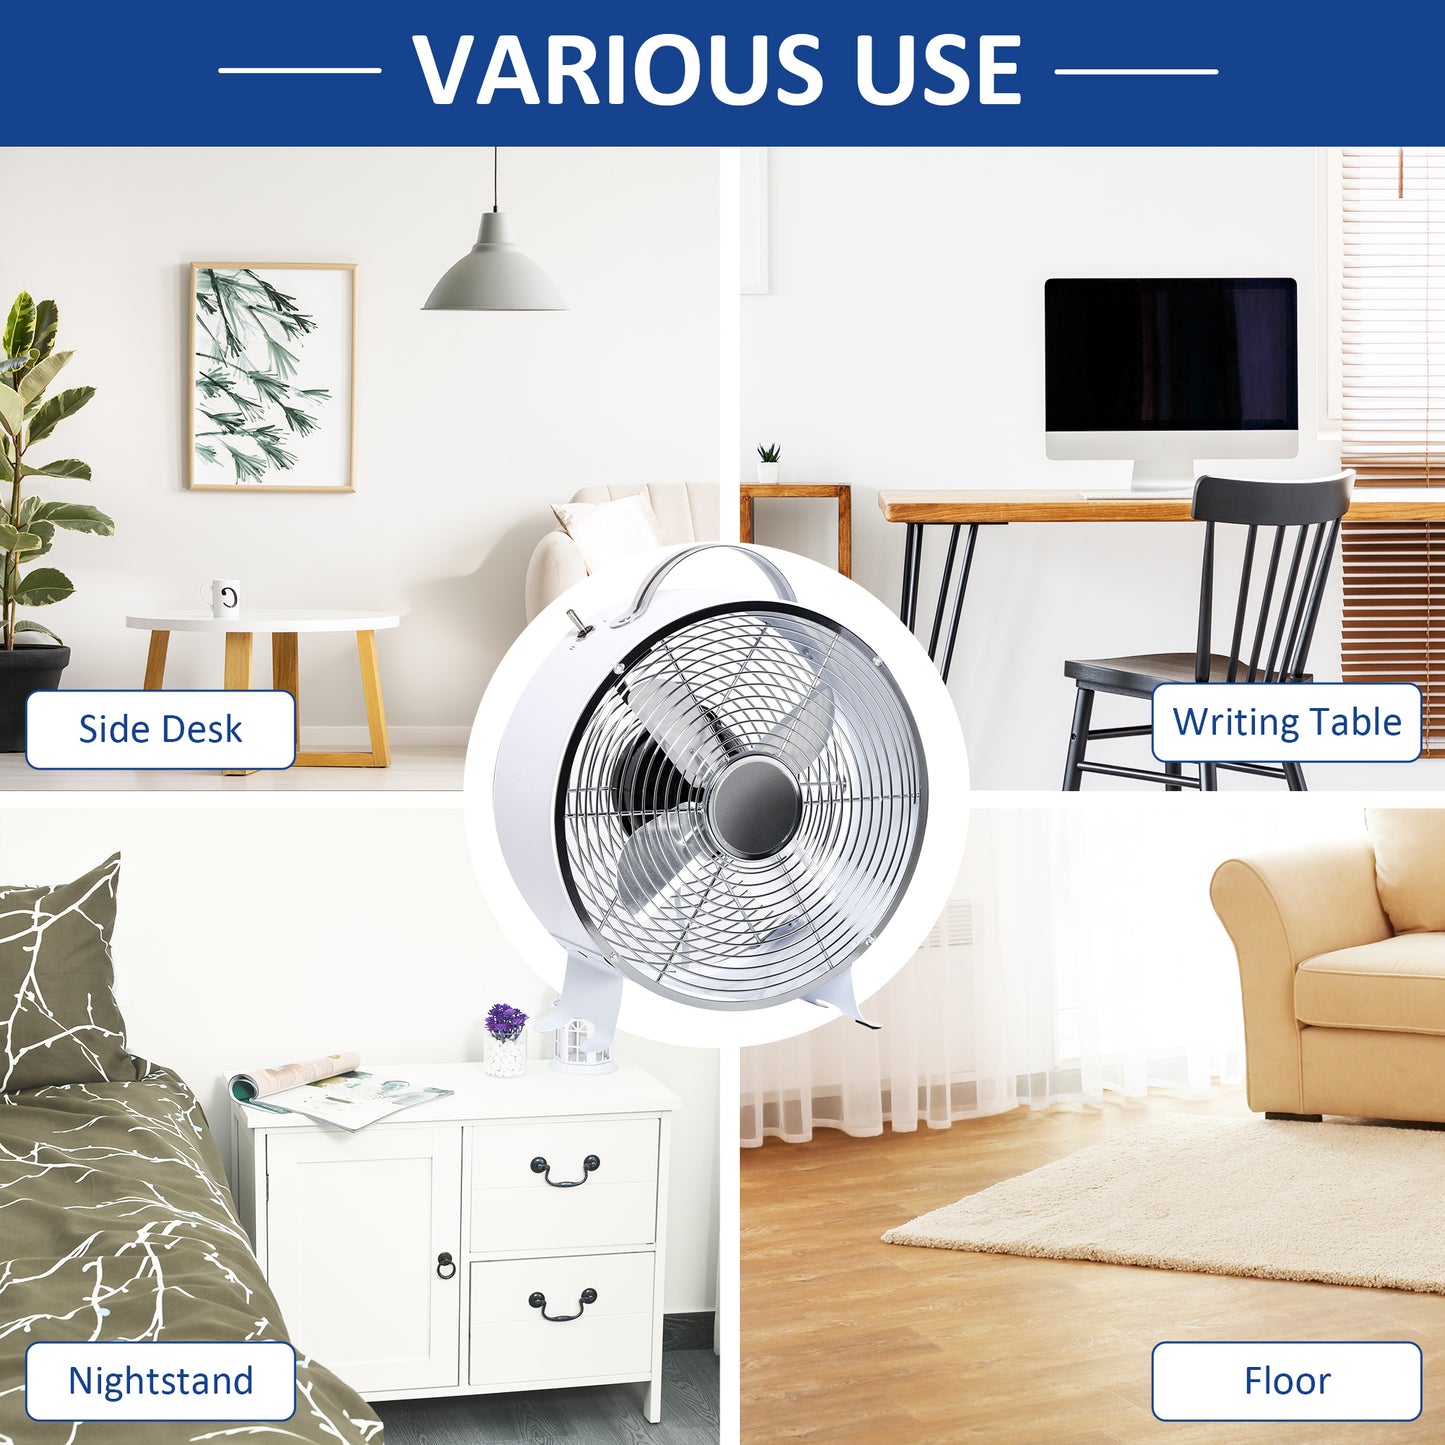 HOMCOM 26cm Electric Desk Fan, 2-Speed, Safety Guard, Anti-Slip, Portable Personal Cooling Fan for Home Office Bedroom, White